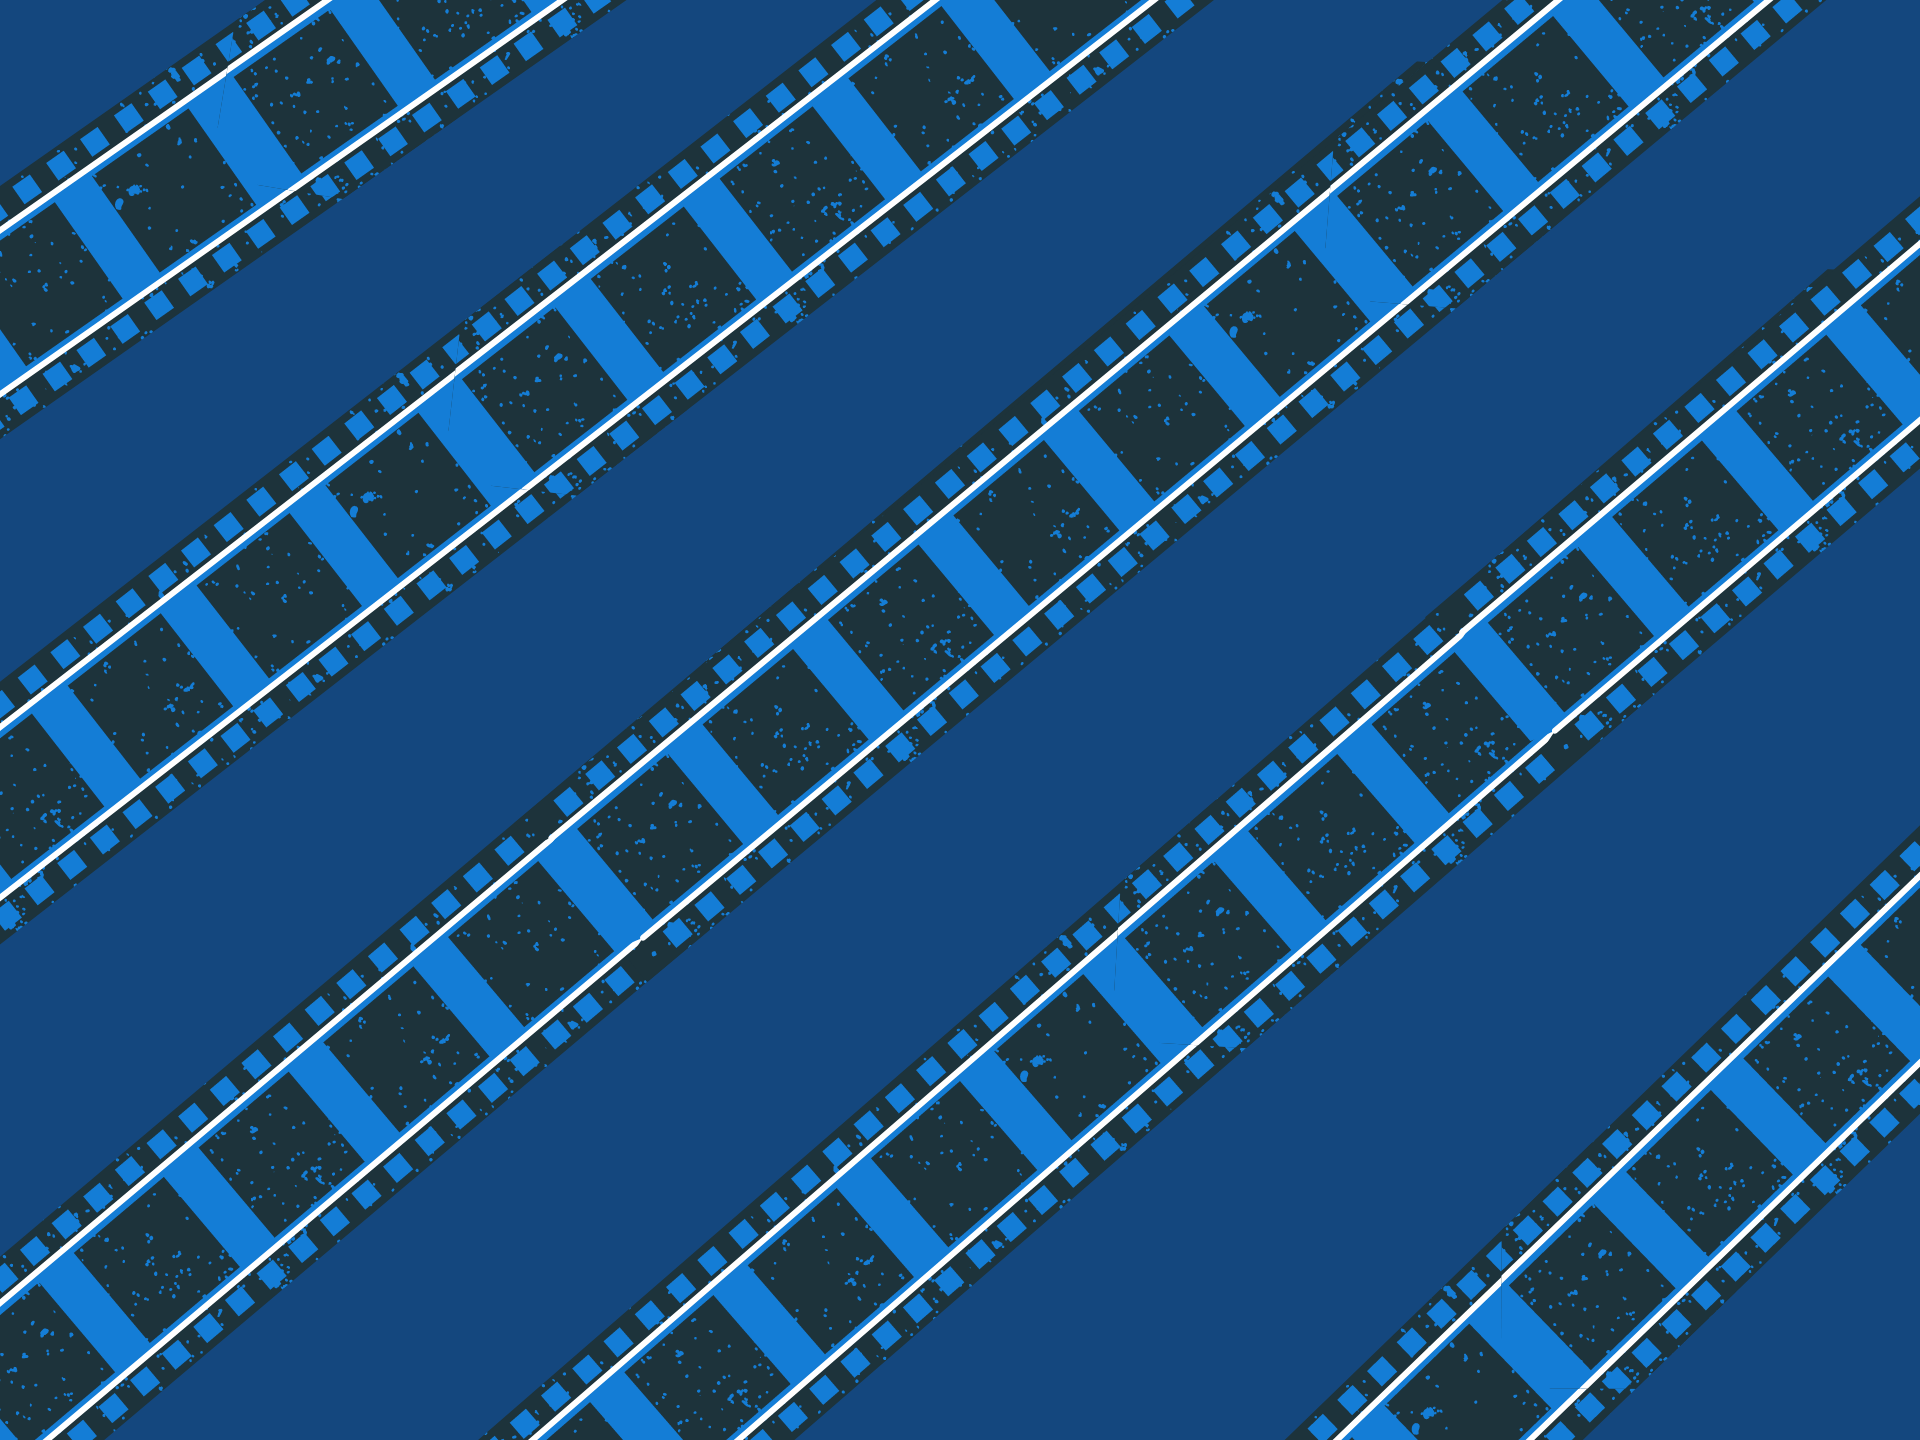 A graphic of multiple blue film reels spread diagonally over a plain blue background.